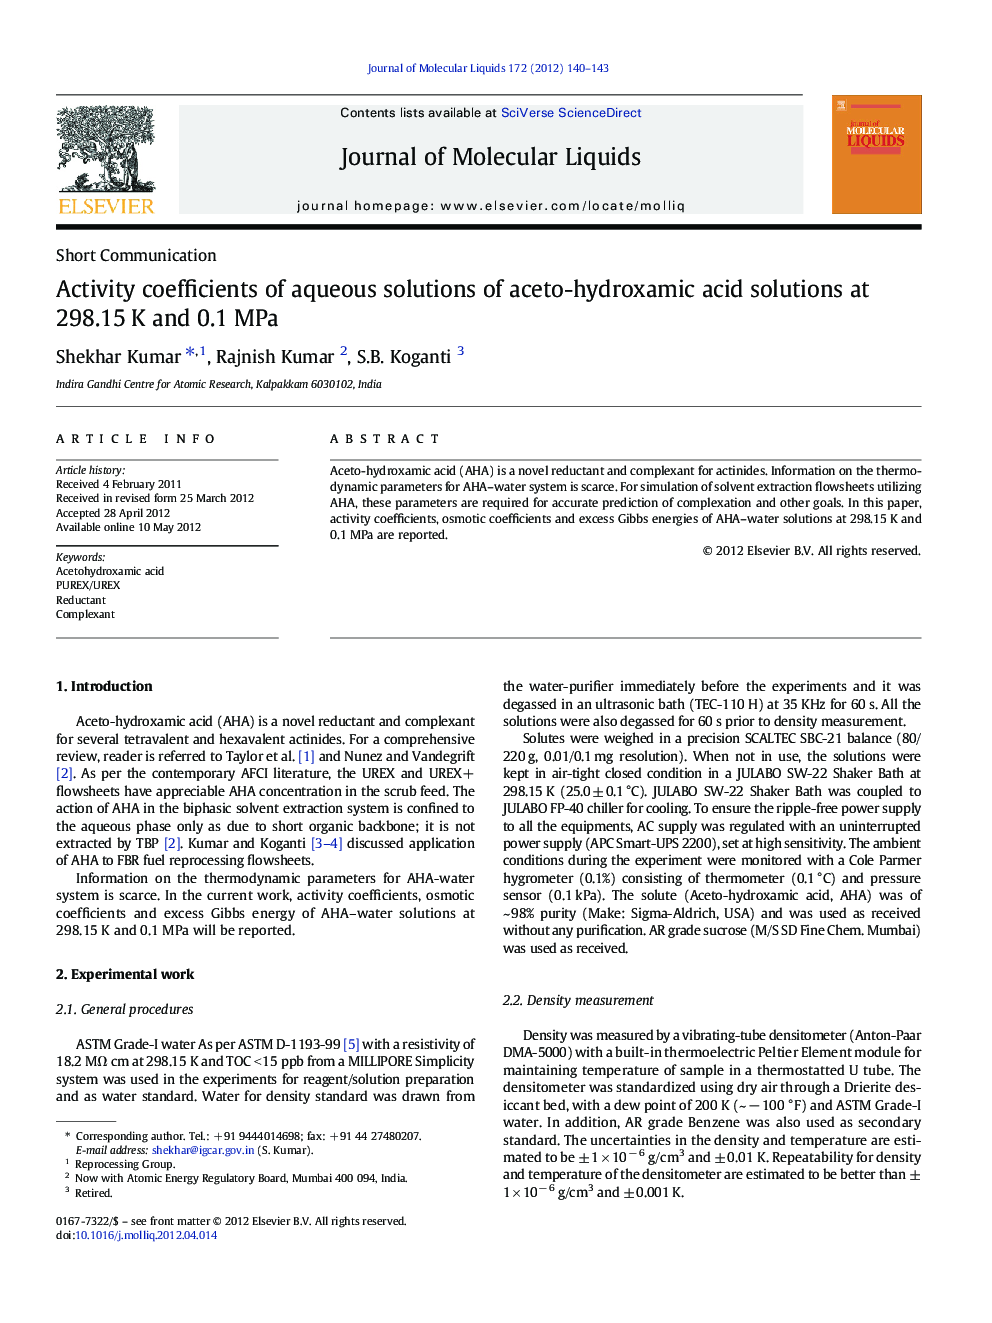 Activity coefficients of aqueous solutions of aceto-hydroxamic acid solutions at 298.15Â K and 0.1Â MPa